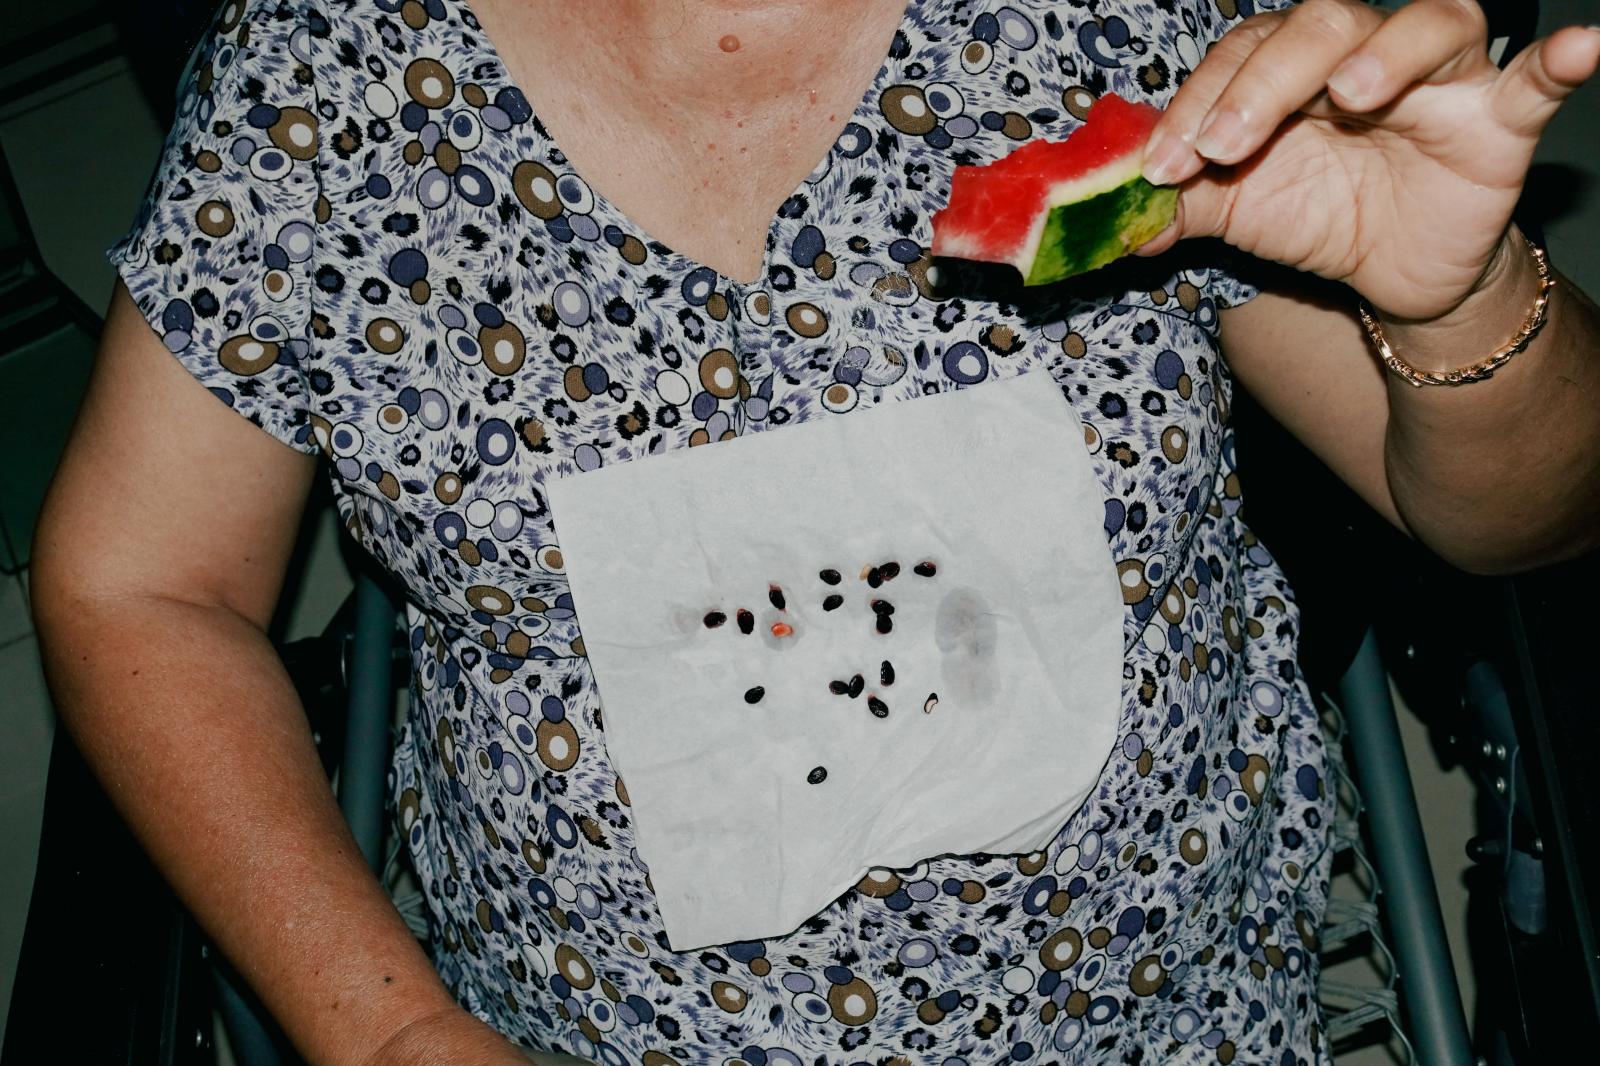 White Tissue & Red Watermelon | Buy this image